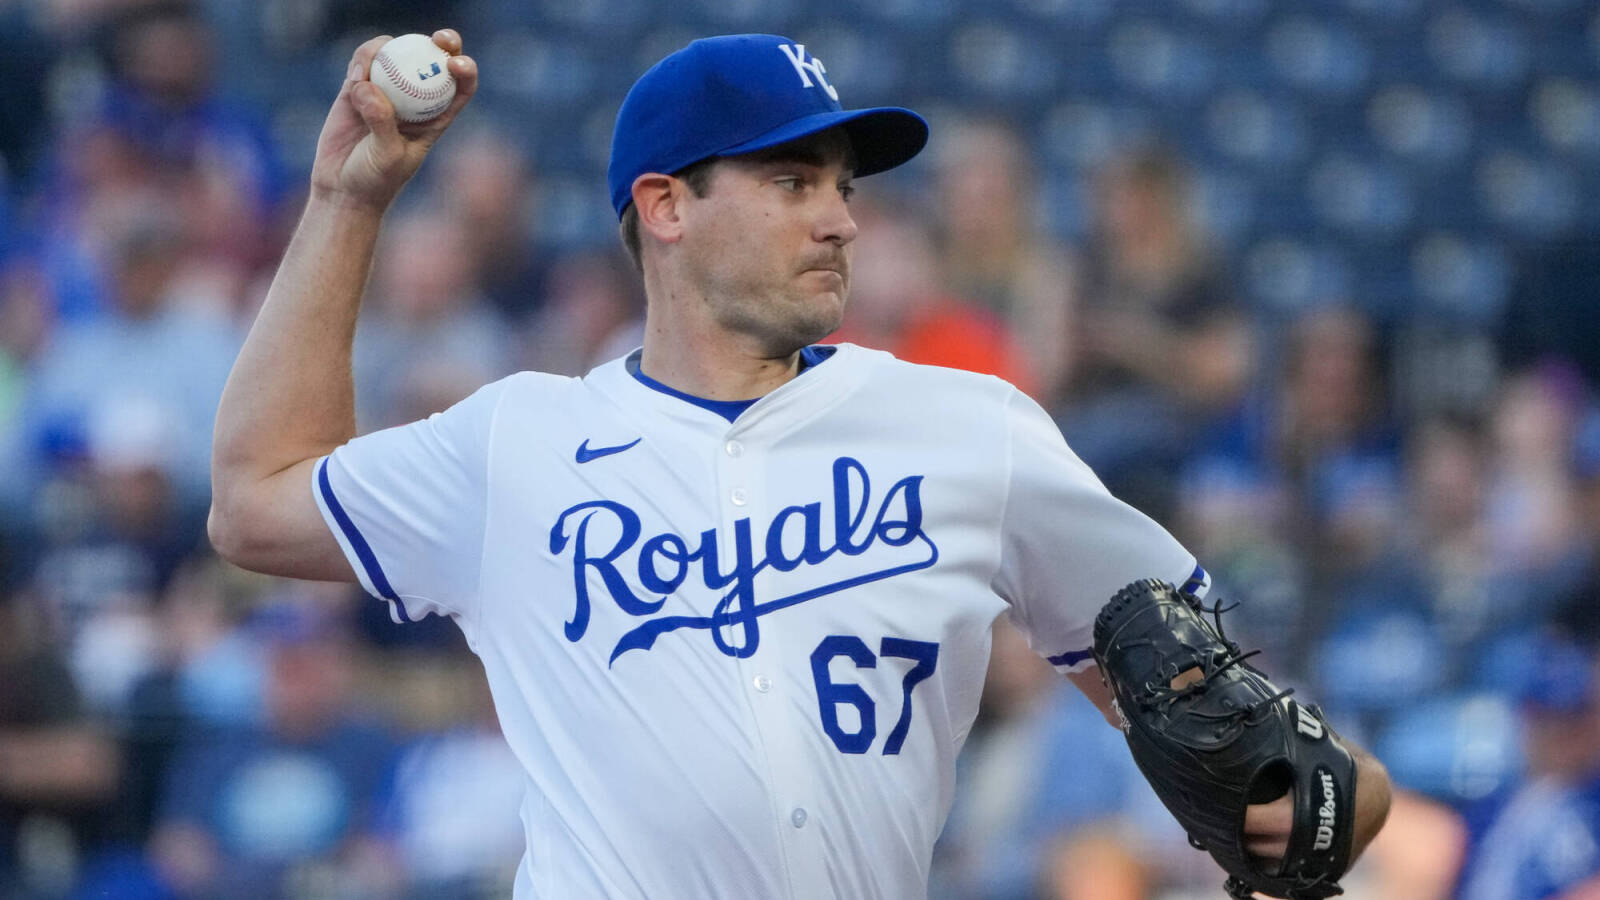 Royals' surprise ace may regress slightly, but don't look for his numbers to crash